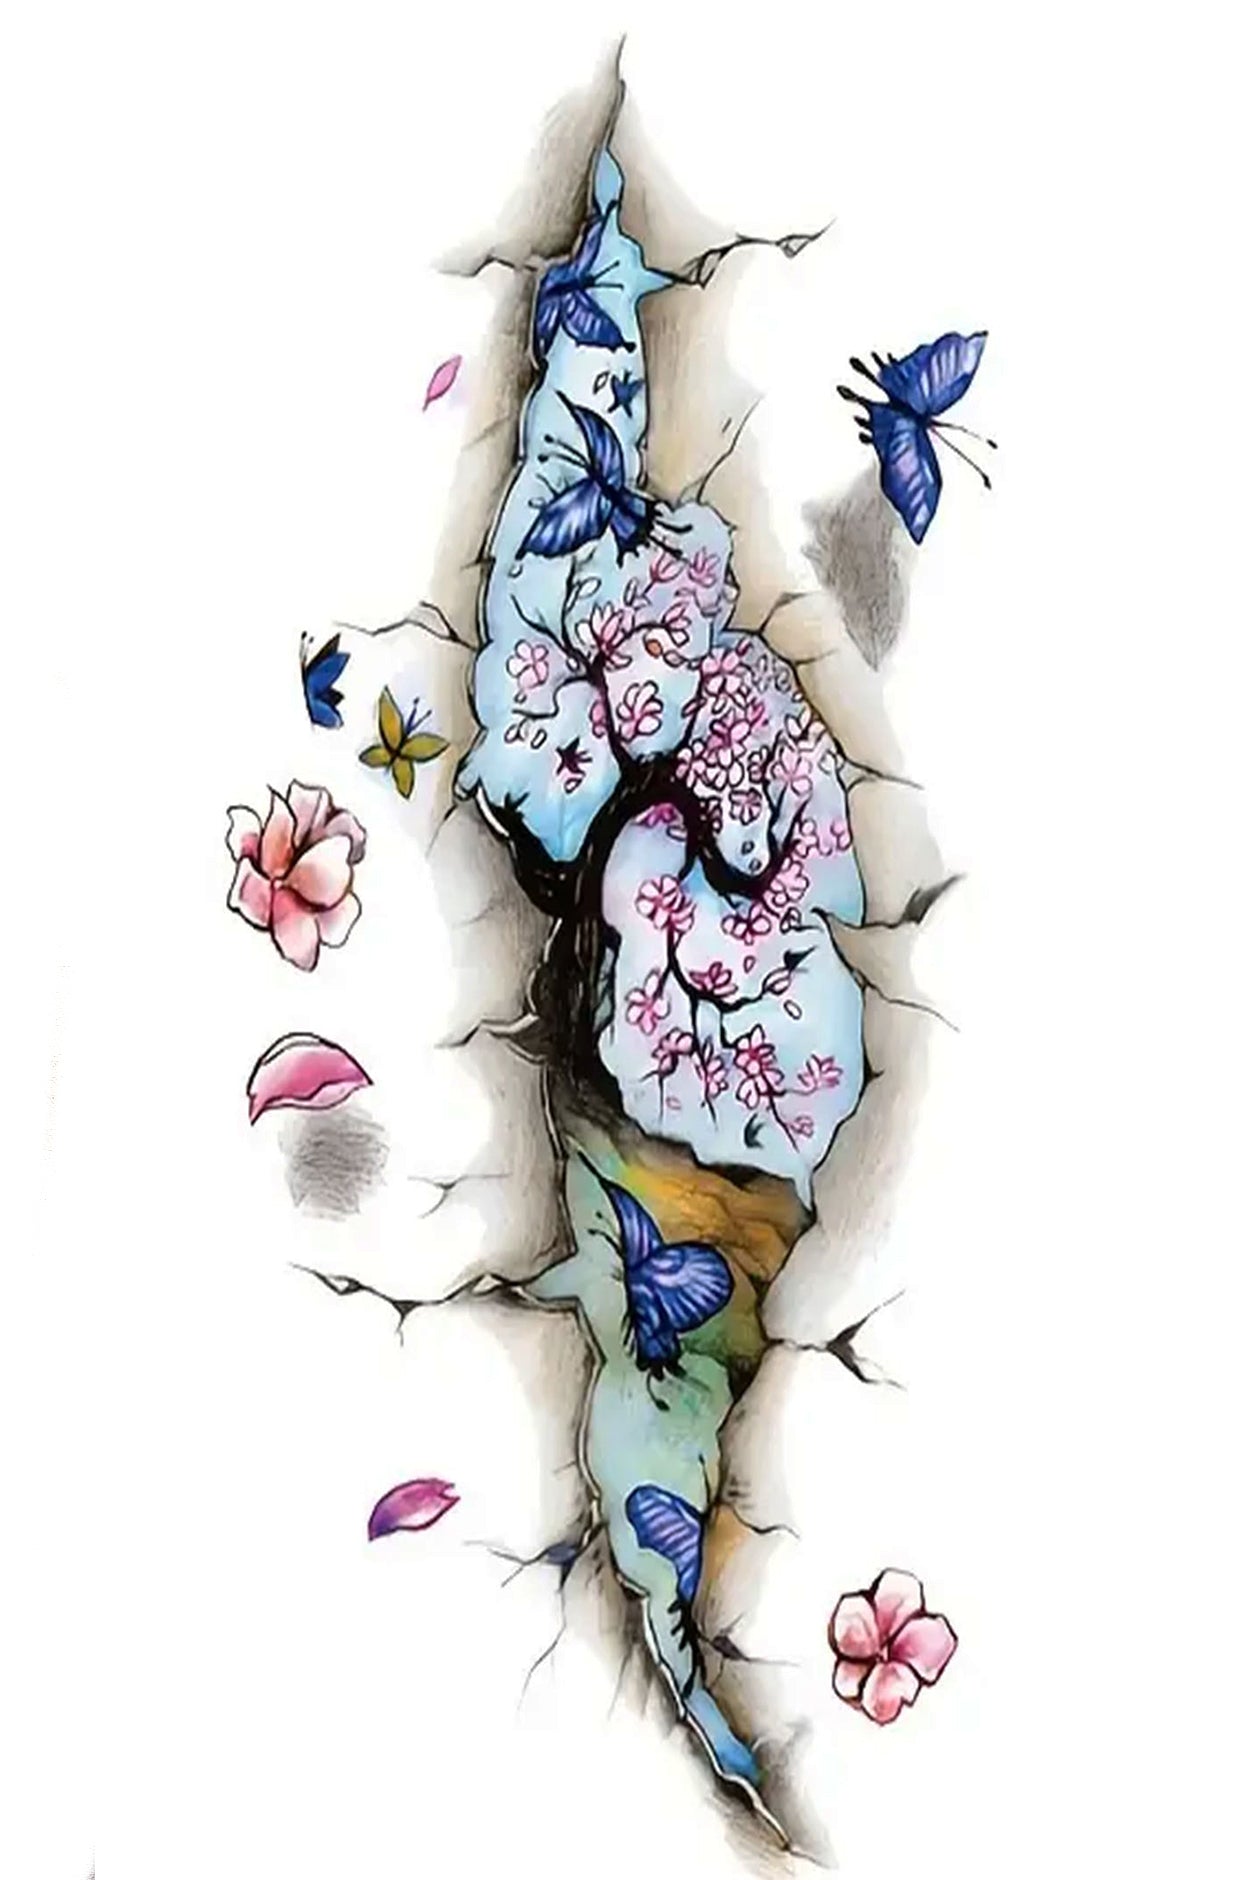 Spring is busting loose in this artwork; it can no longer hold back as blossoms and butterflies are free from winter; use this tag as inspiration for spring theme body art, incorporating more butterflies and flowers to finish the beautiful you.  Creatively wear this artwork on any part of your body, arm, leg, torso, or shoulder.